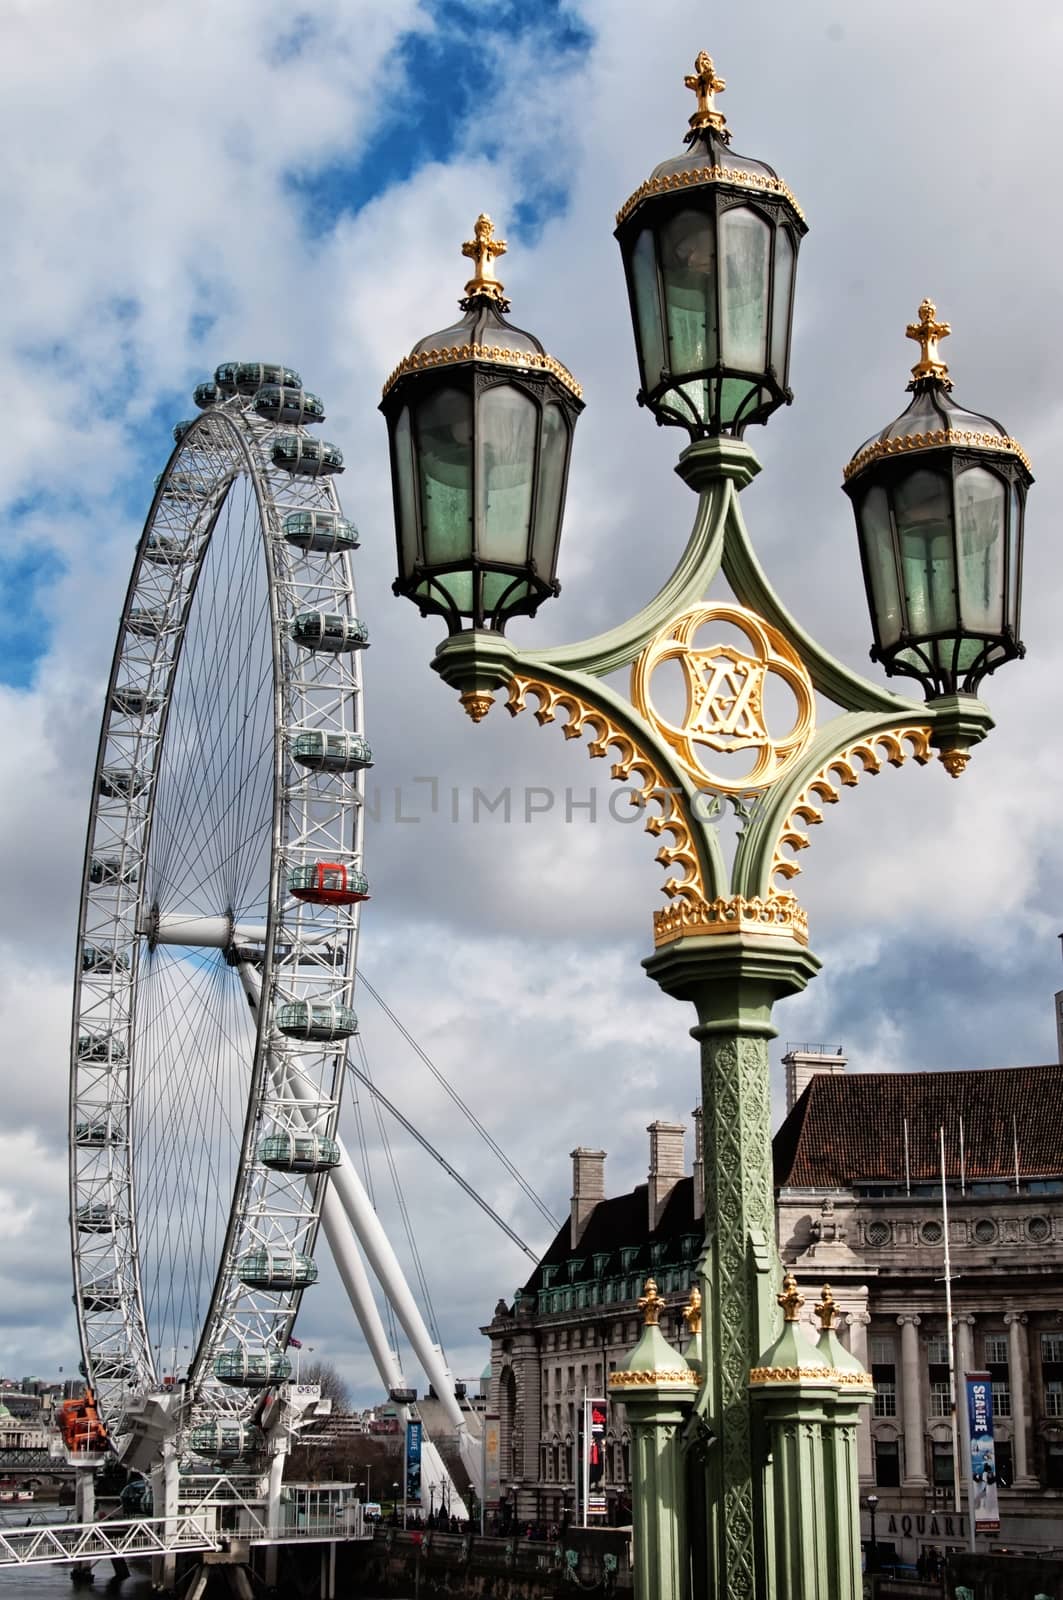 The London Eye -  giant Ferris wheel on the South Bank of the River Thames in London by mitakag